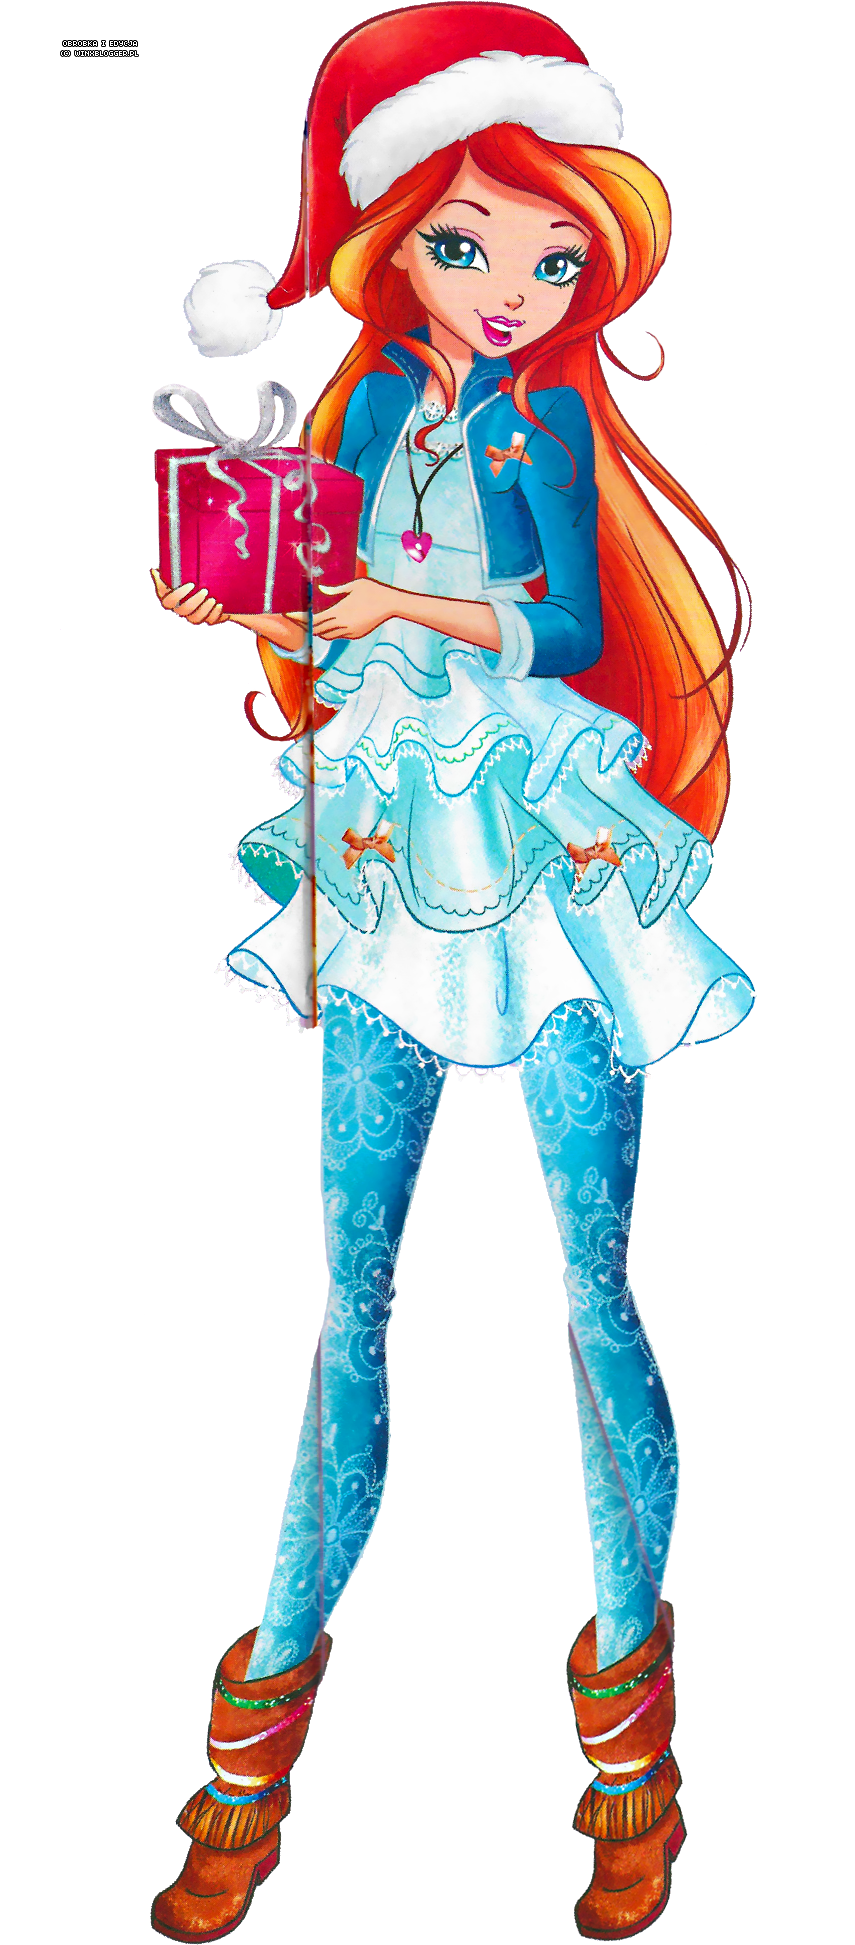 bloom-winx8-casual-by-winxblogger.png